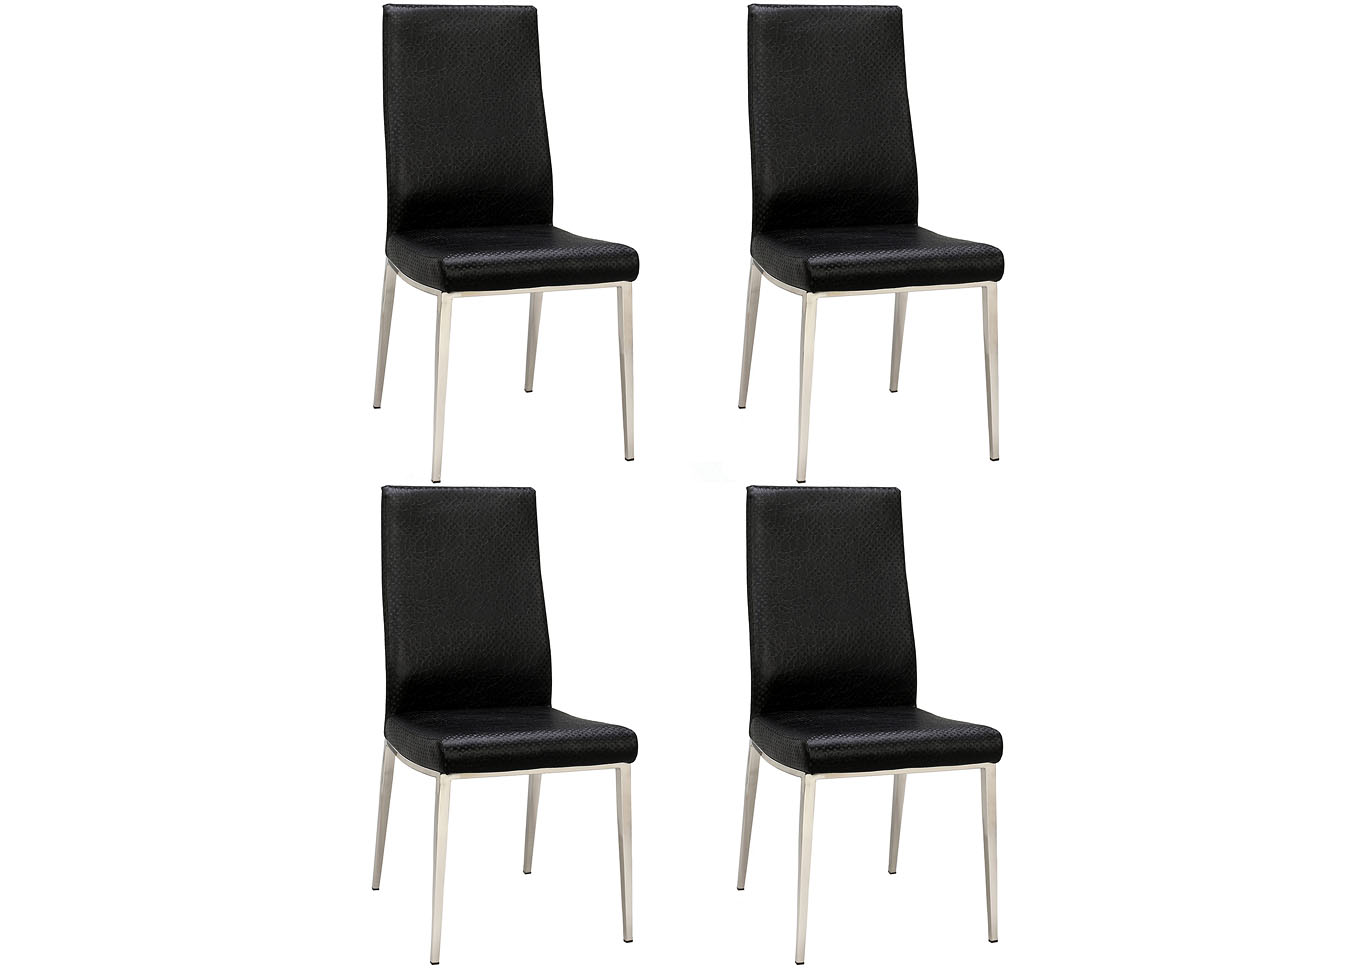 Jamila Crocodile Black High Contour-Back Side Chair (Set of 4),Chintaly Imports